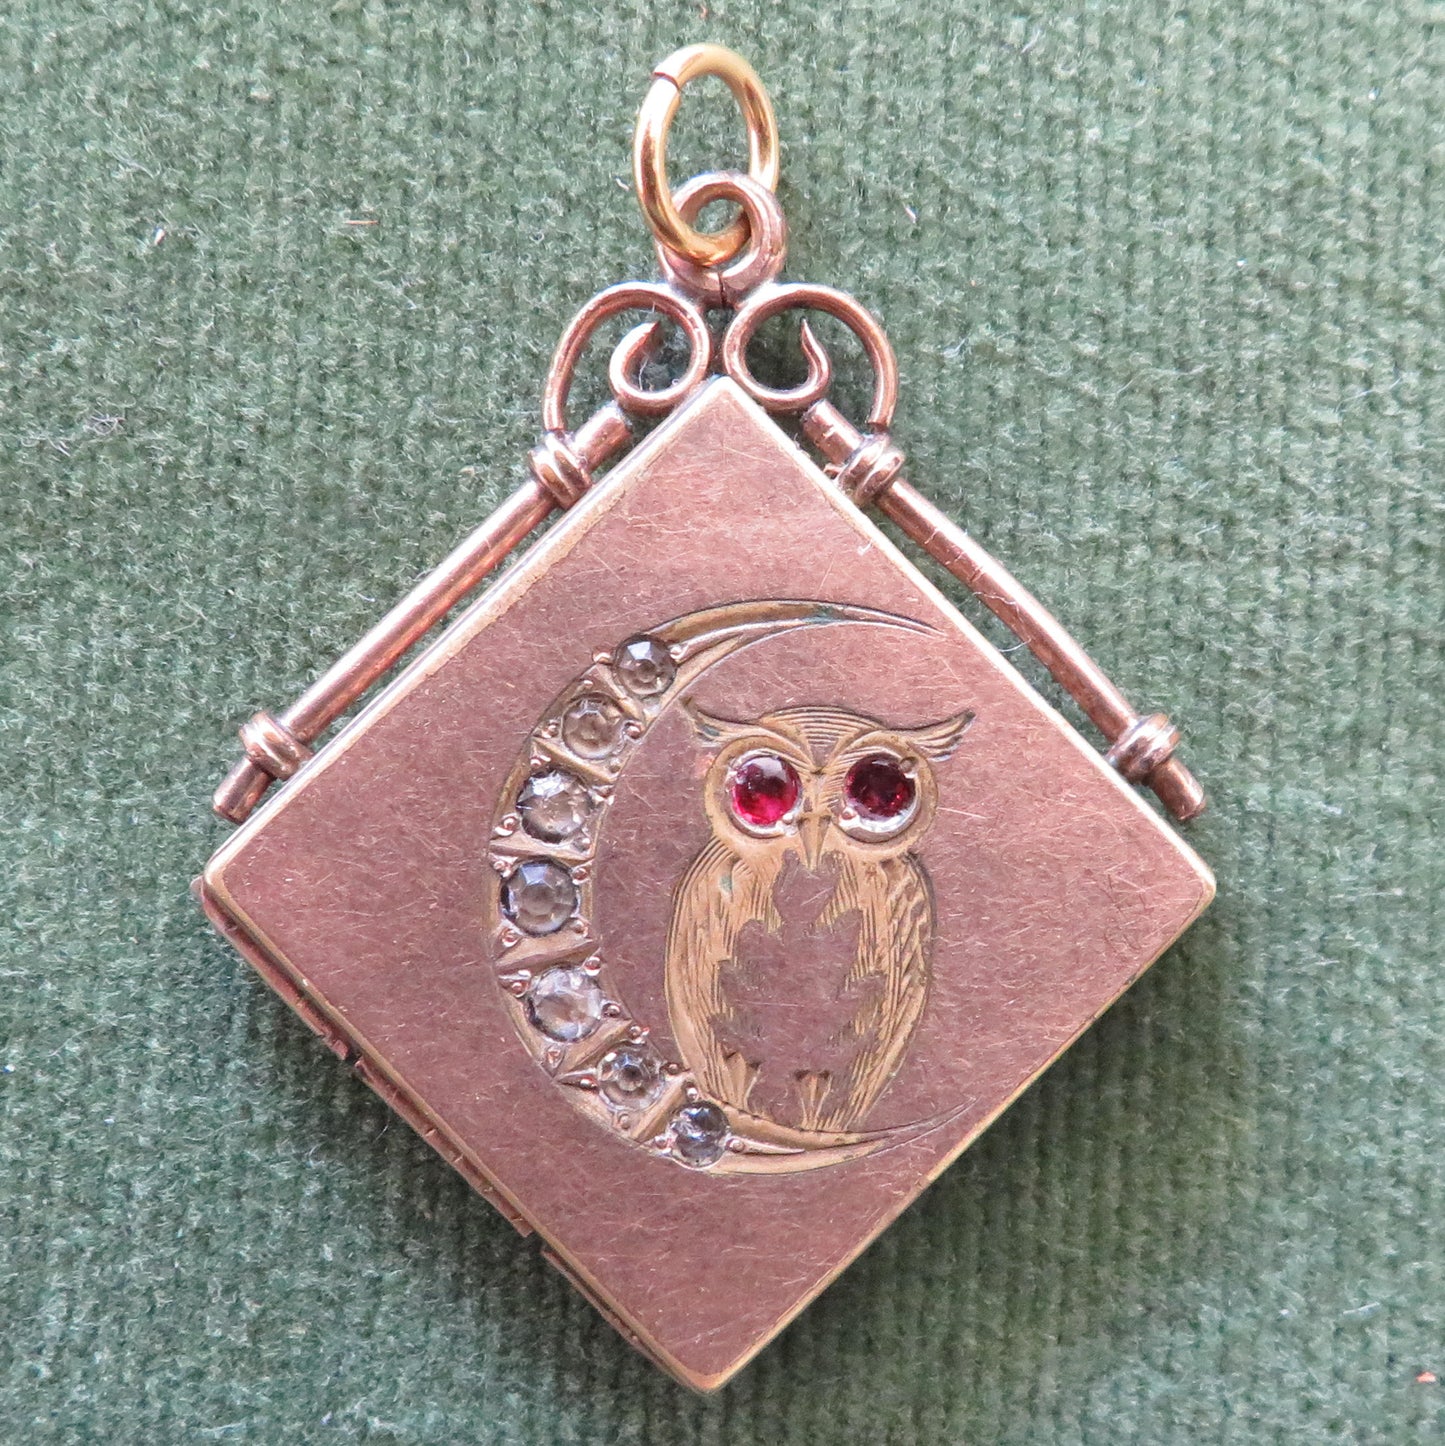 Rose Gold Plated Locket Set With Garnets And Clear Stones Depicting An Owl And Moon